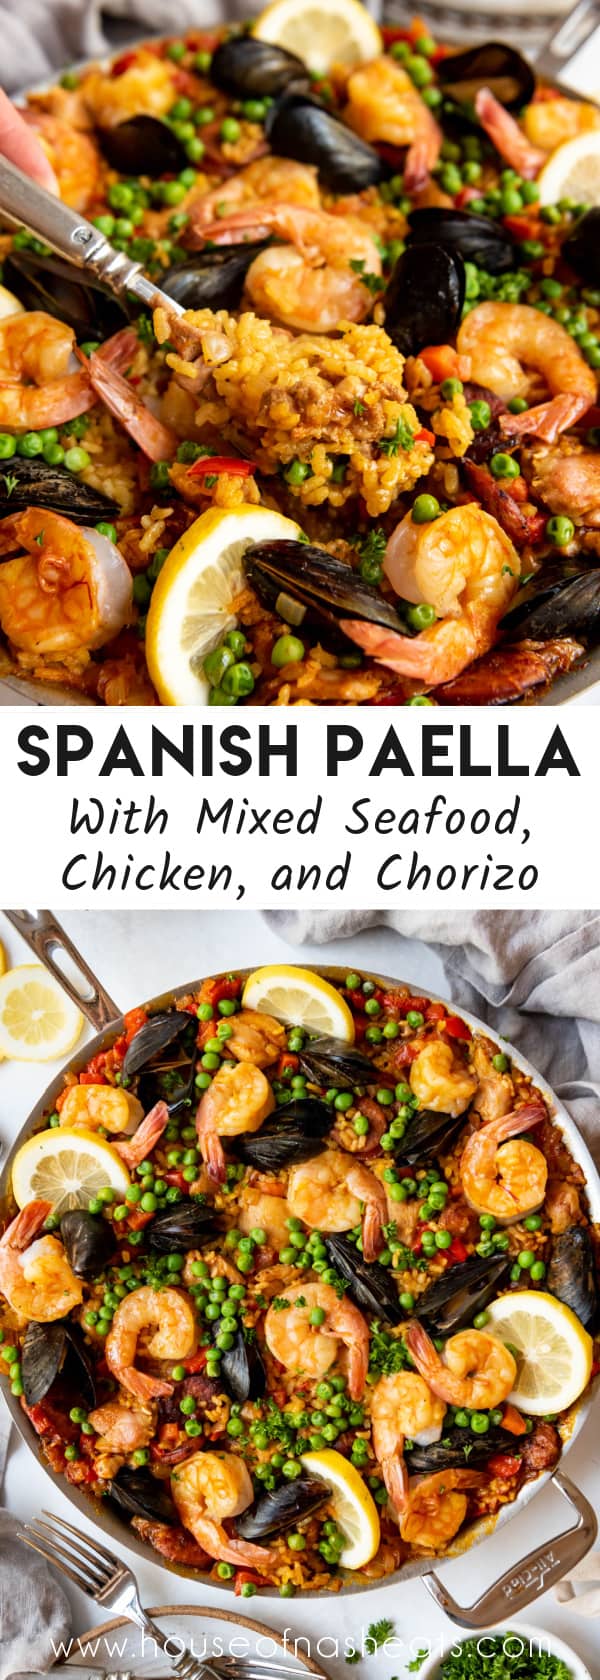 A collage of images of Spanish paella with text overlay.